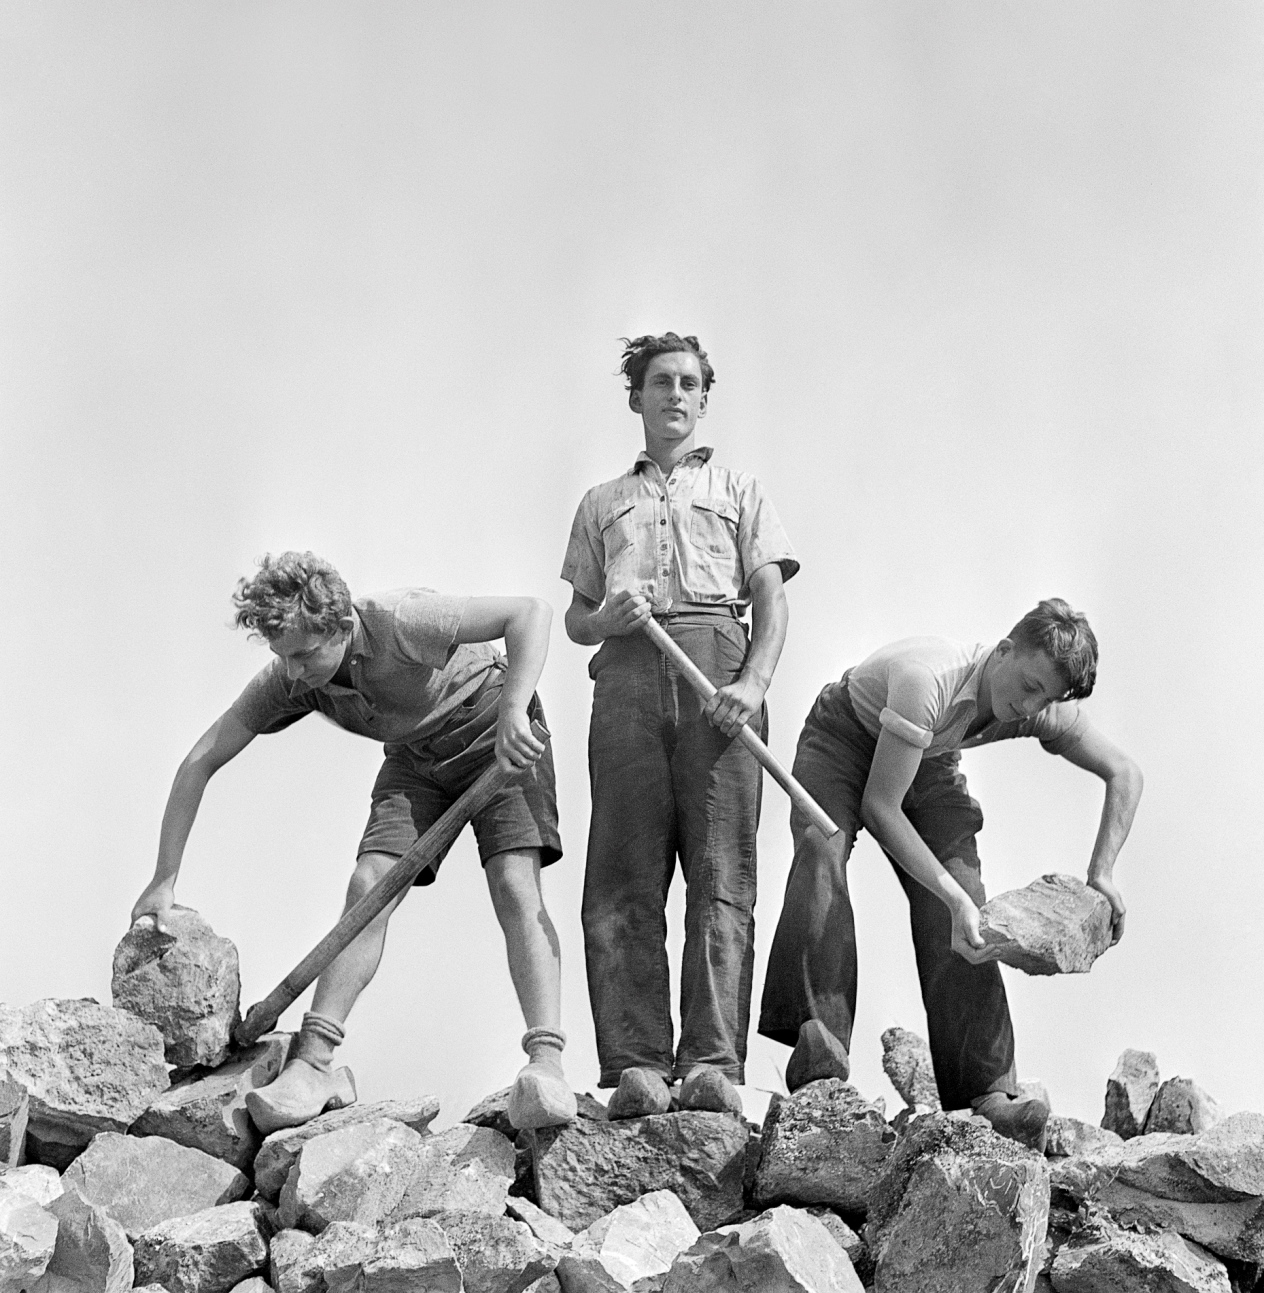 [Ernst Kaufmann, center, and unidentified Zionist youth, wearing clogs while learning construction techniques in a quarry, Werkdorp Nieuwesluis, Wieringermeer, The Netherlands], 1939. © Mara Vishniac Kohn, courtesy International Center of Photography (źródło: dzięki uprzejmości International Center of Photography w Nowym Jorku)